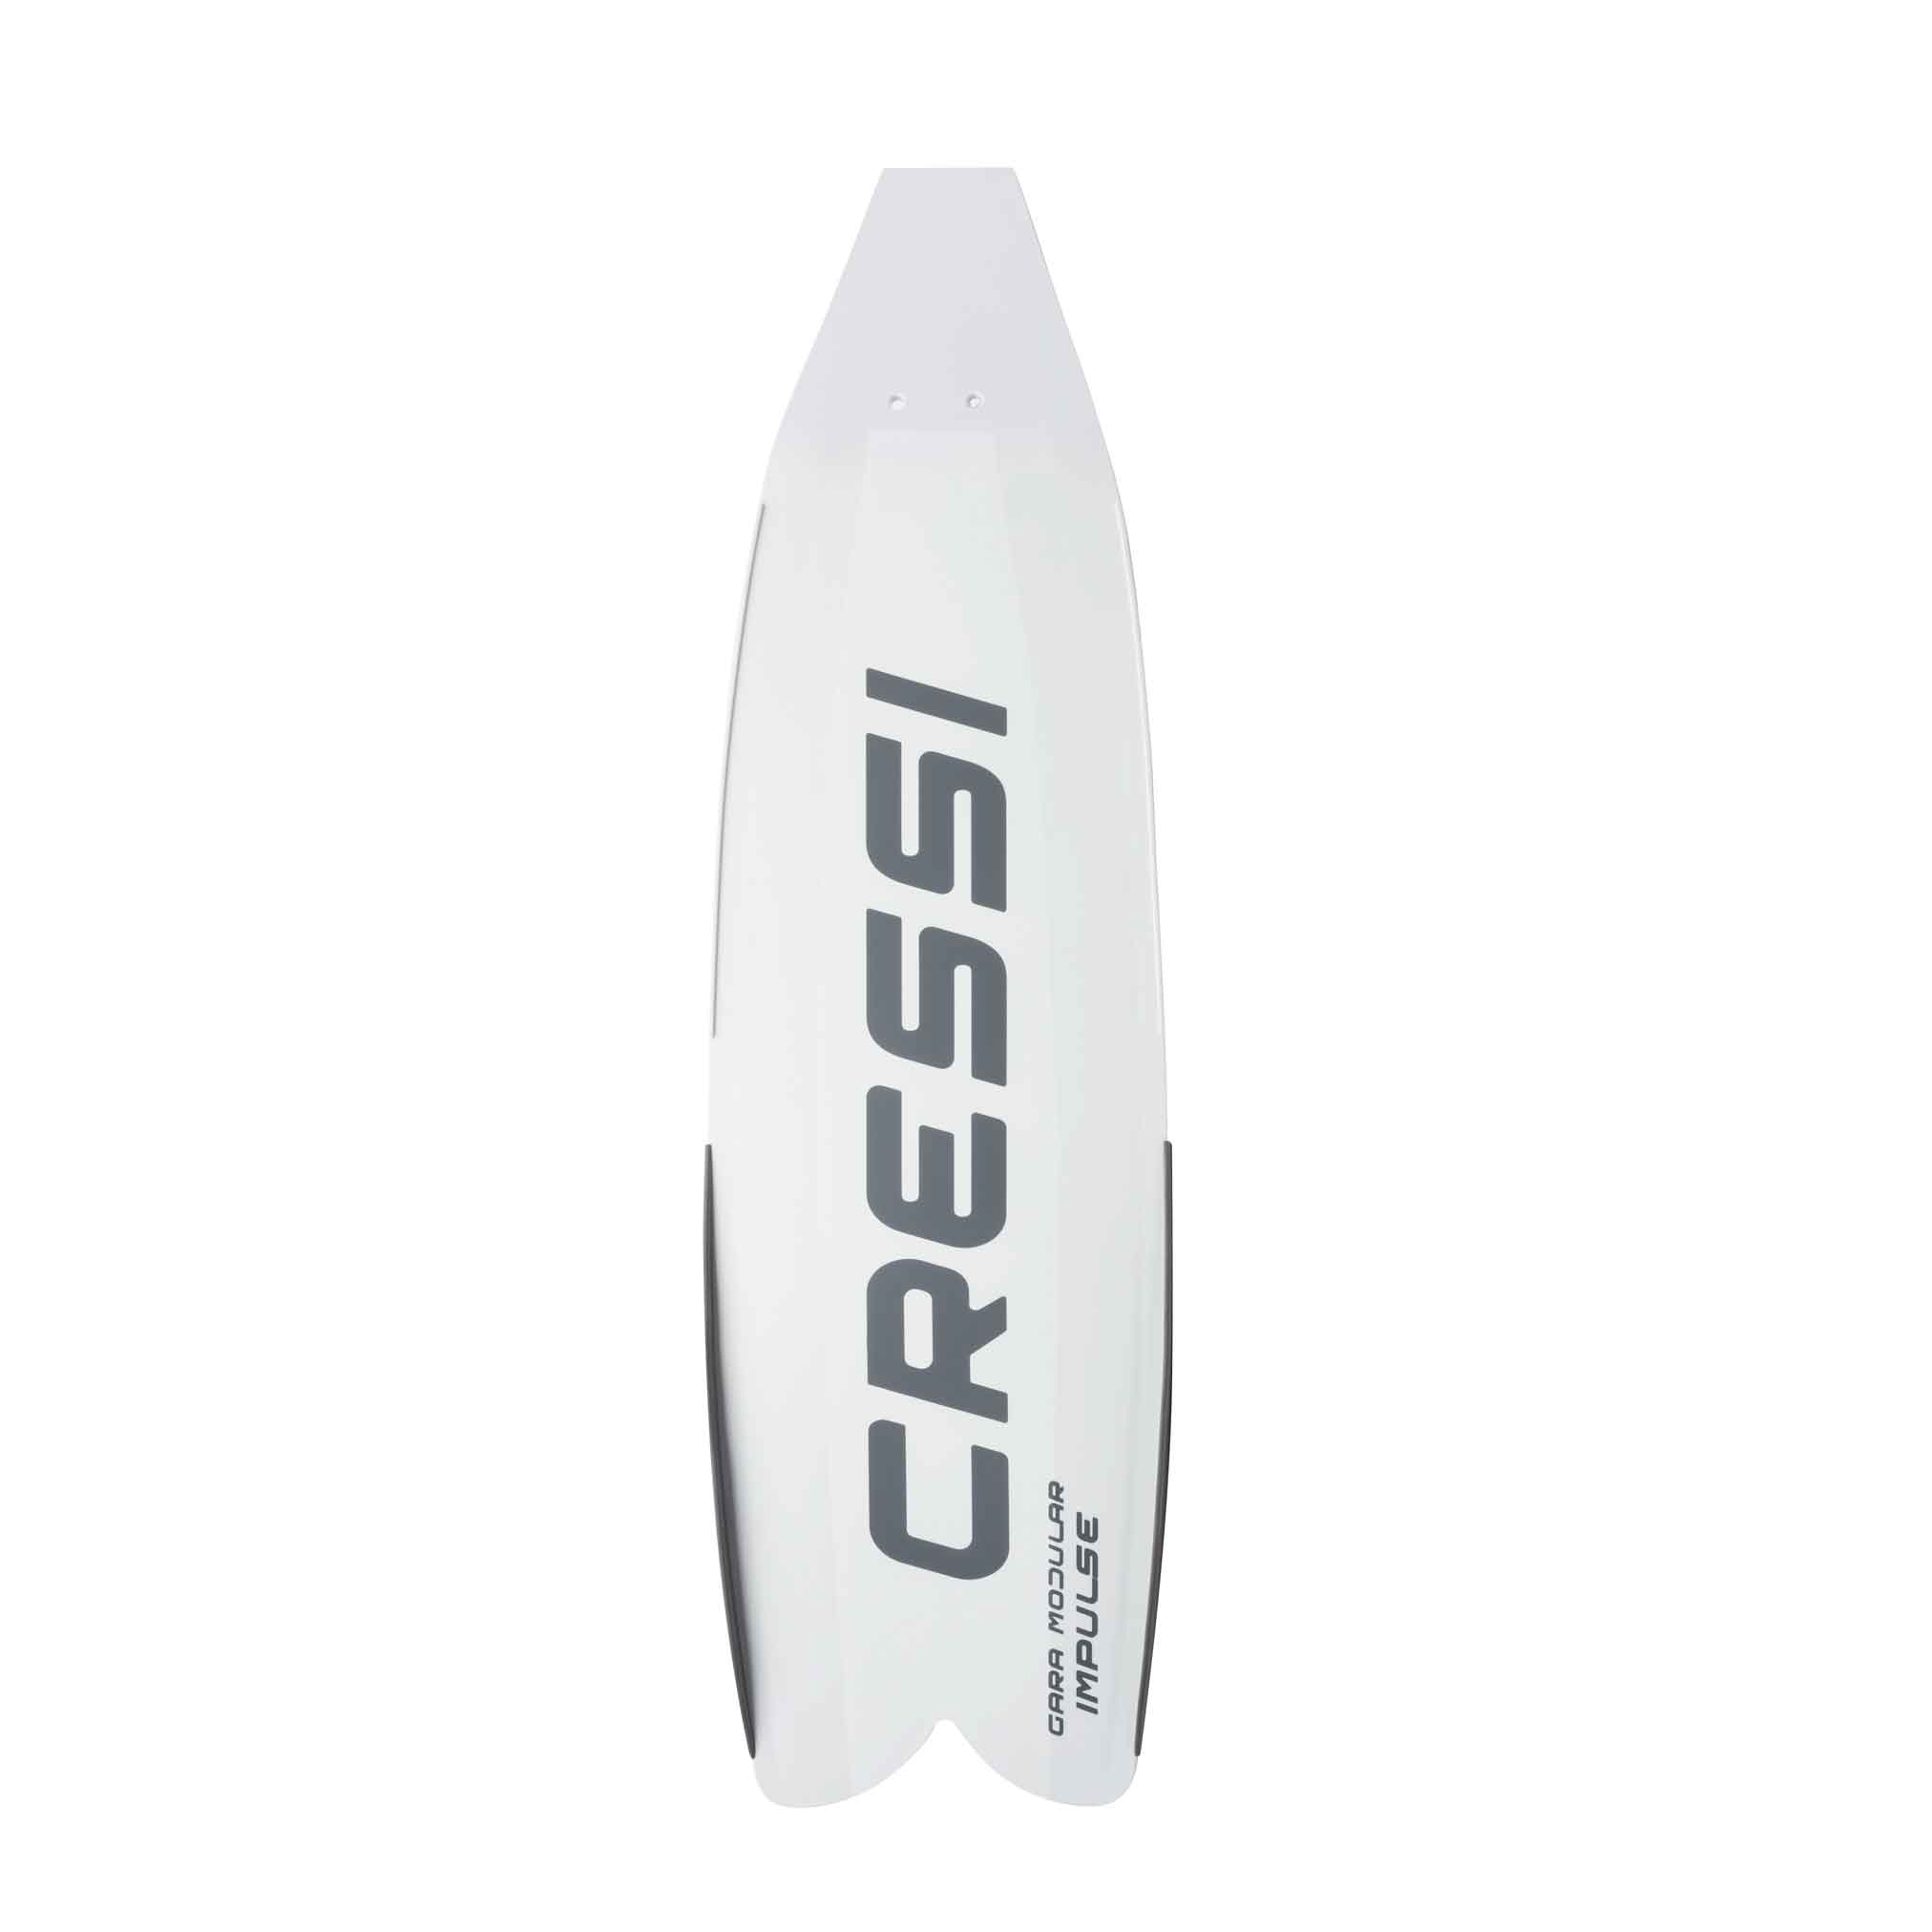 Everything you want to know about Cressi Gara Modular Impulse fins